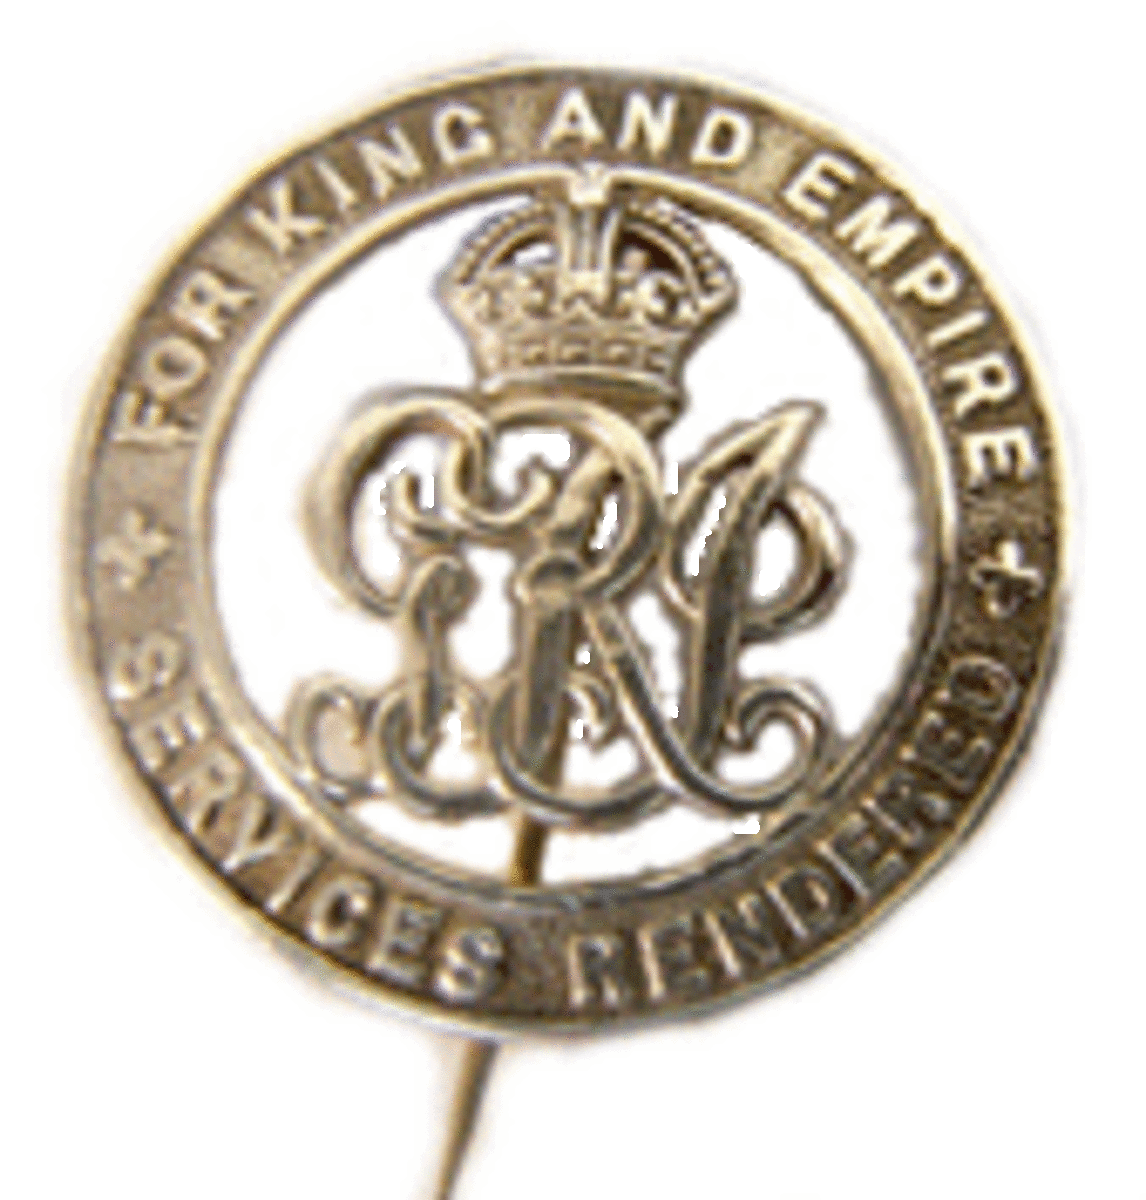 Men who had been wounded or discharged from the Forces were issued the Silver War Badge to wear on civilian clothes to distinguish them from "shirkers".